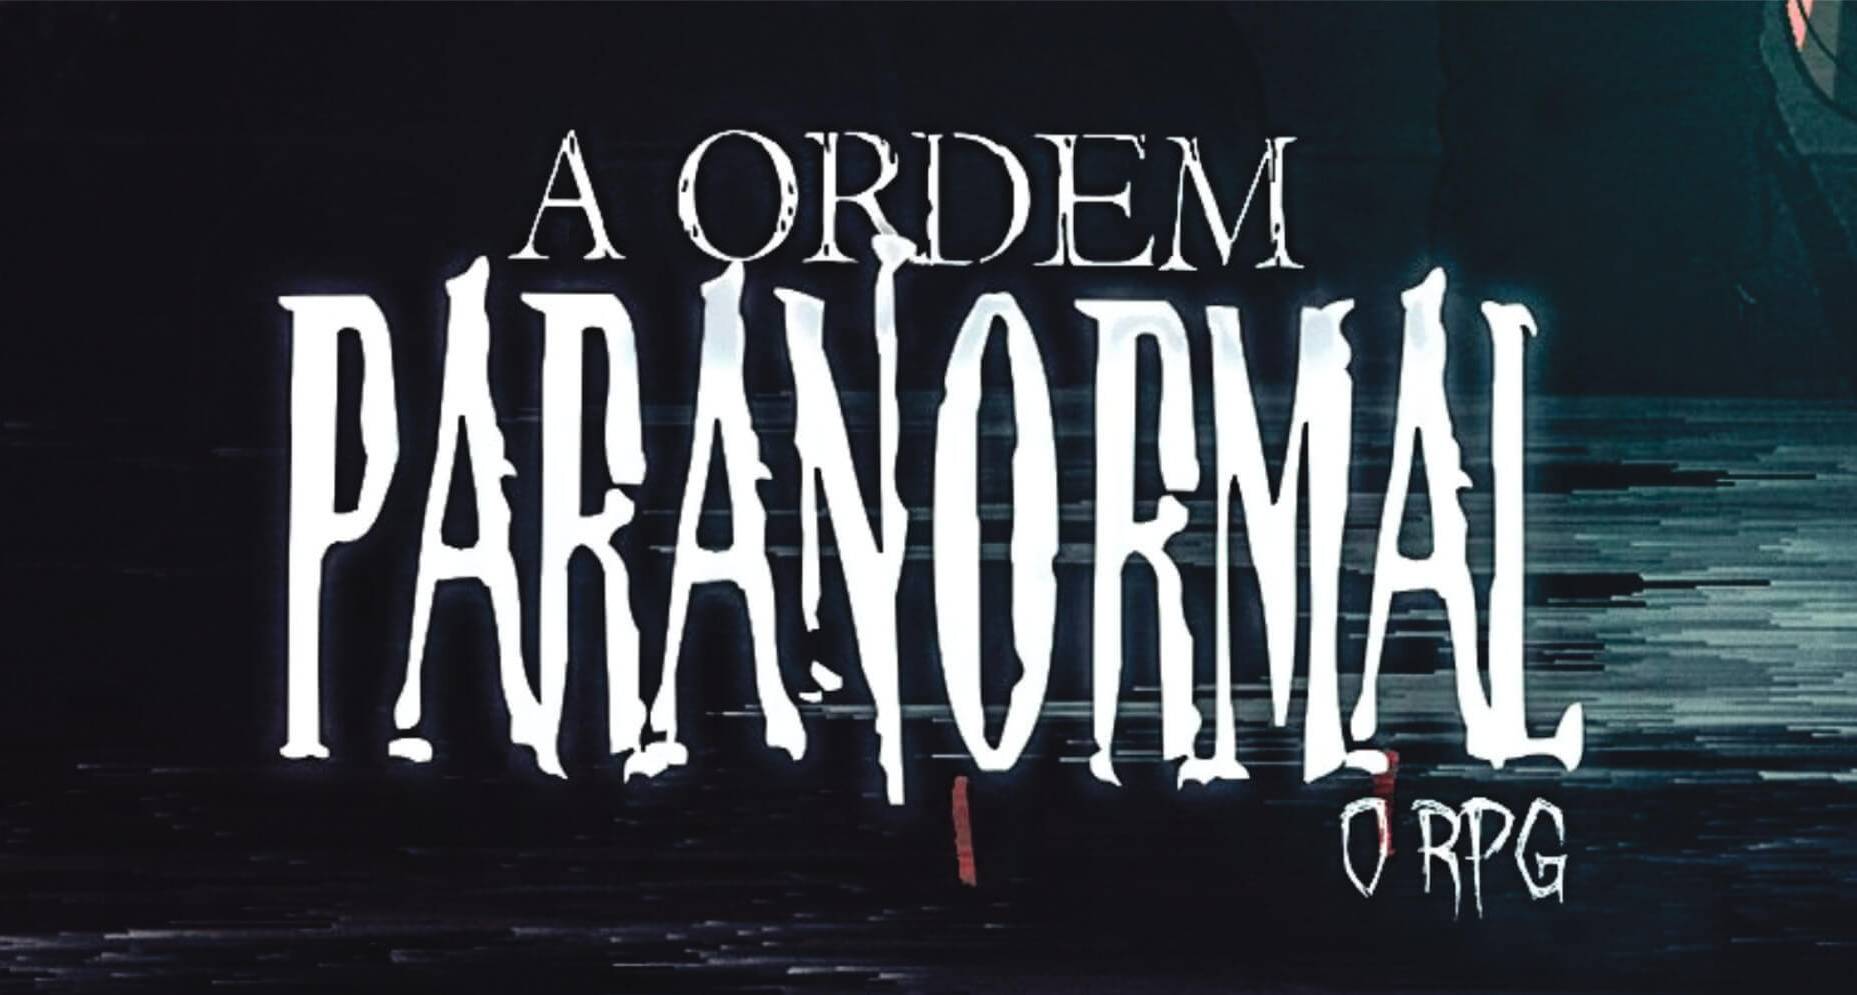 Roll20 on X: In Ordem Paranormal RPG by @jamboeditora, an organization of  agents called the Ordo Realitas investigate mysteries and fight demons to  prevent chaos and destruction. 🕯️This supernatural character sheet (and